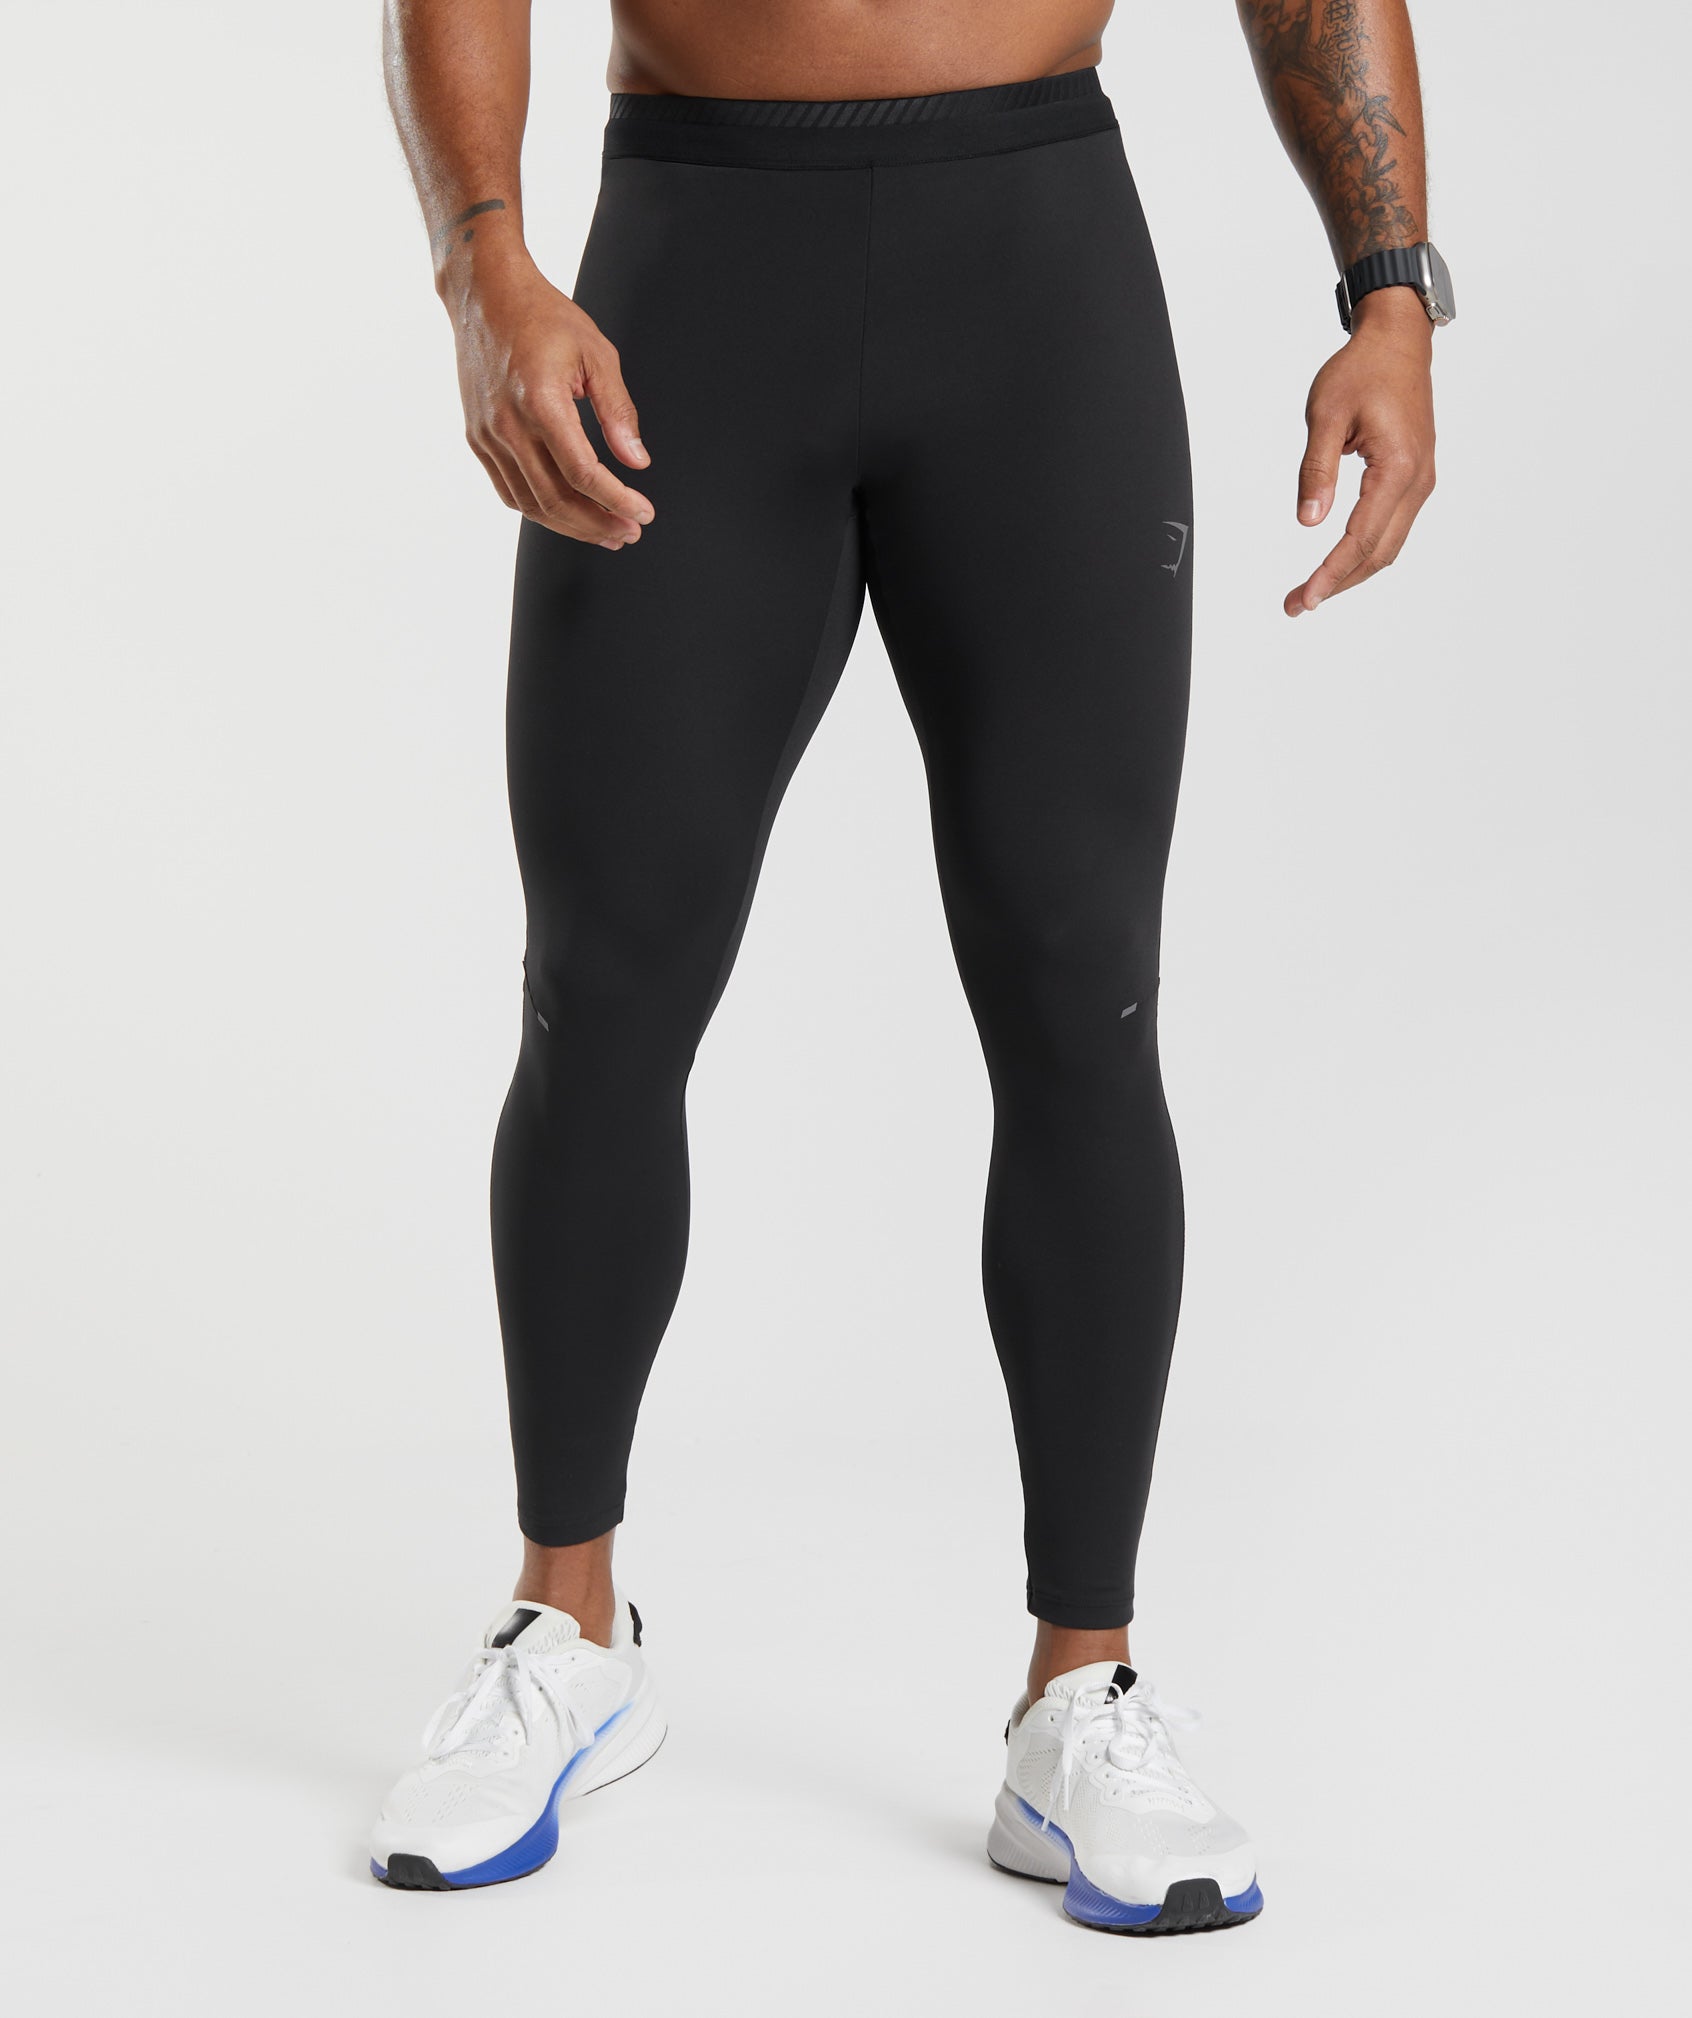 Black Gym Leggings - Free Delivery Available - Gymshark